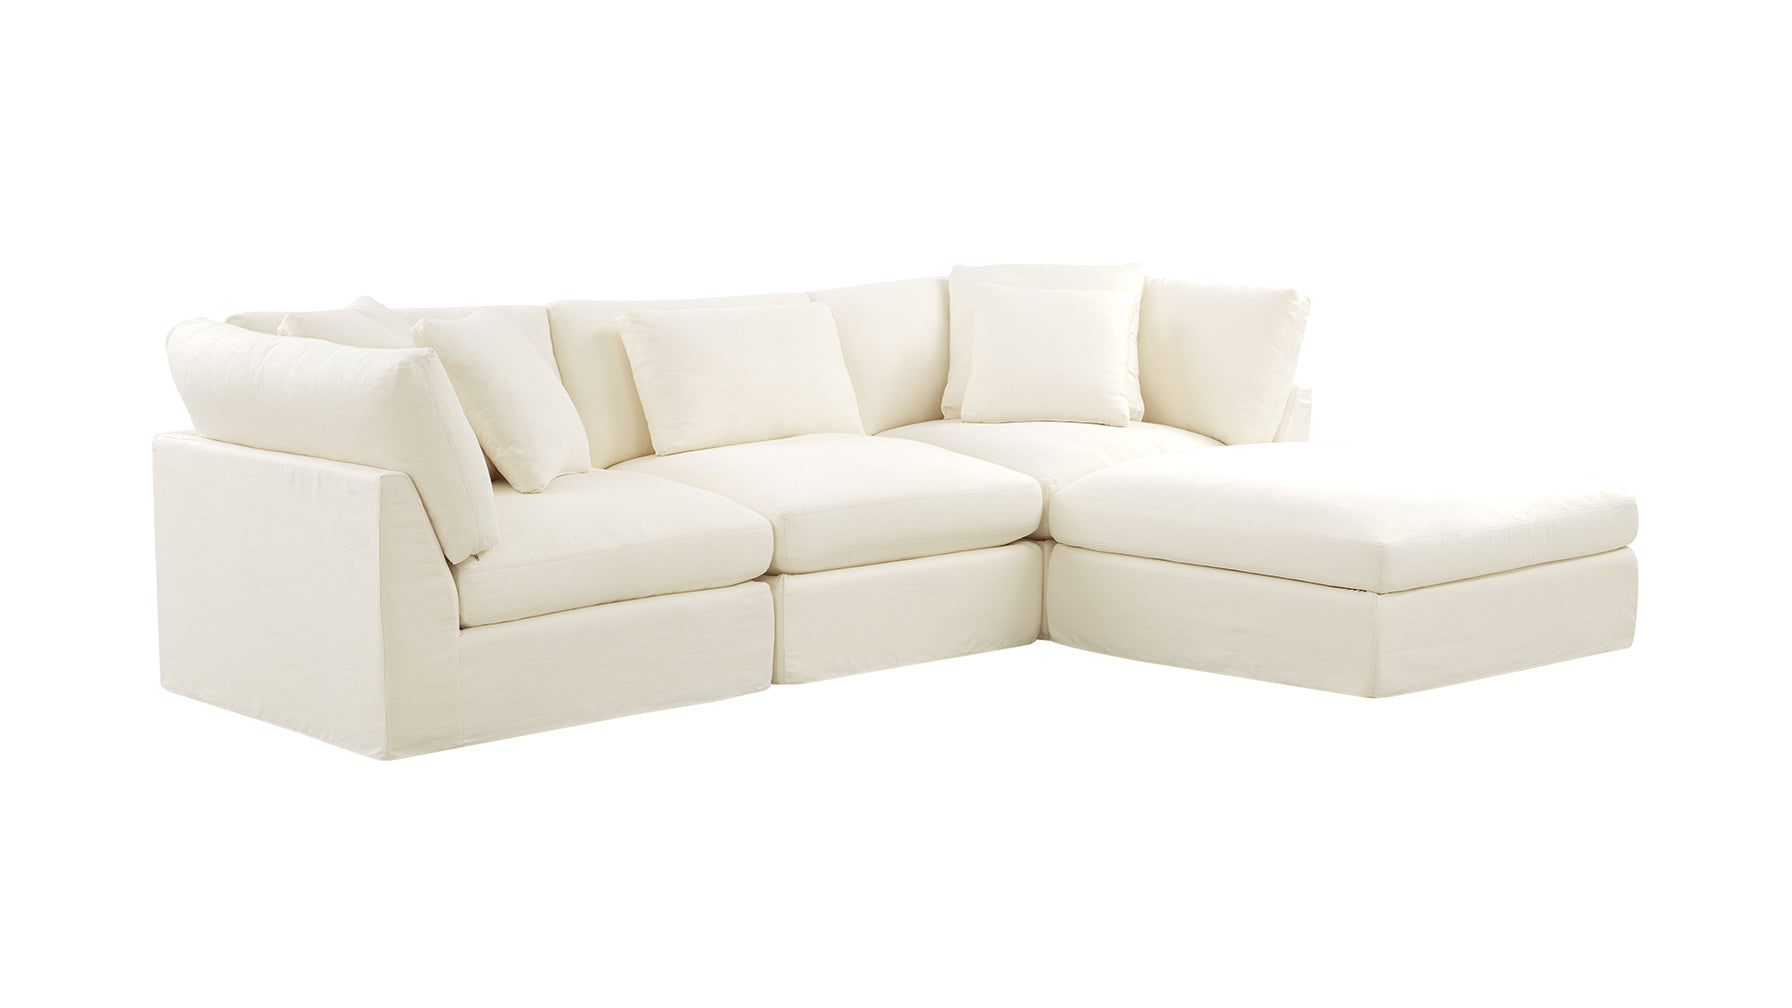 Get Together™ 4-Piece Modular Sectional, Large, Cream Linen - Image 2